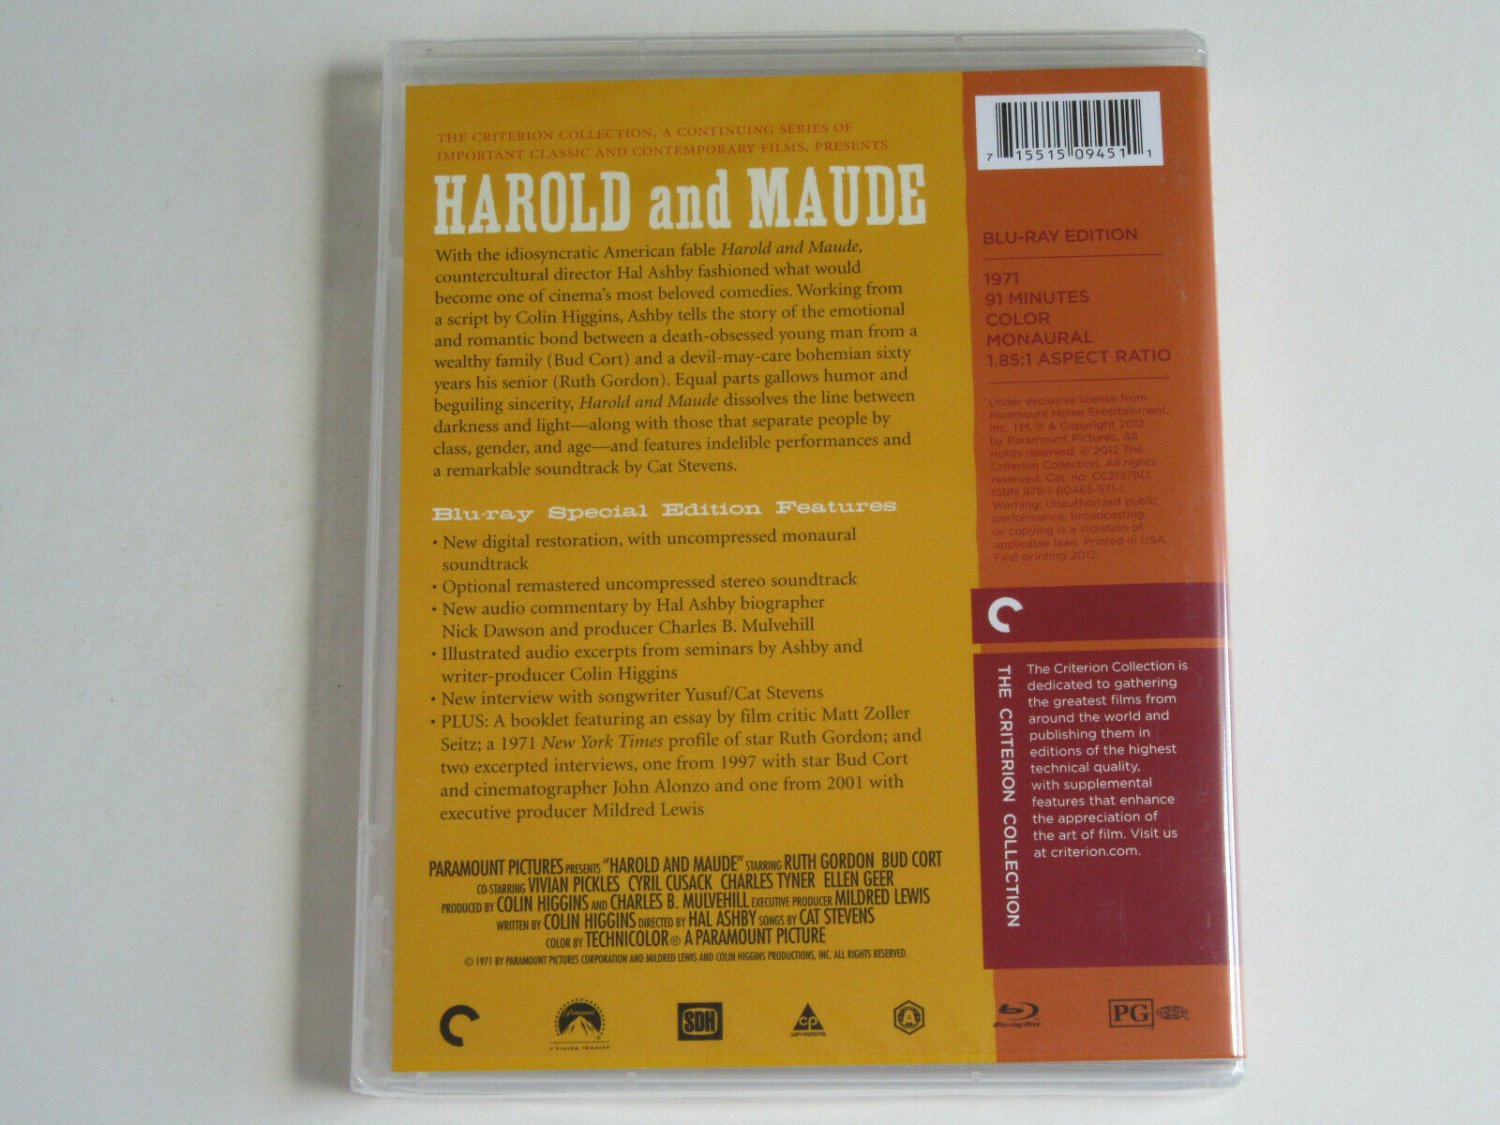 Harold And Maude Criterion Collection Blu Ray Bluray Widescreen New And Sealed 